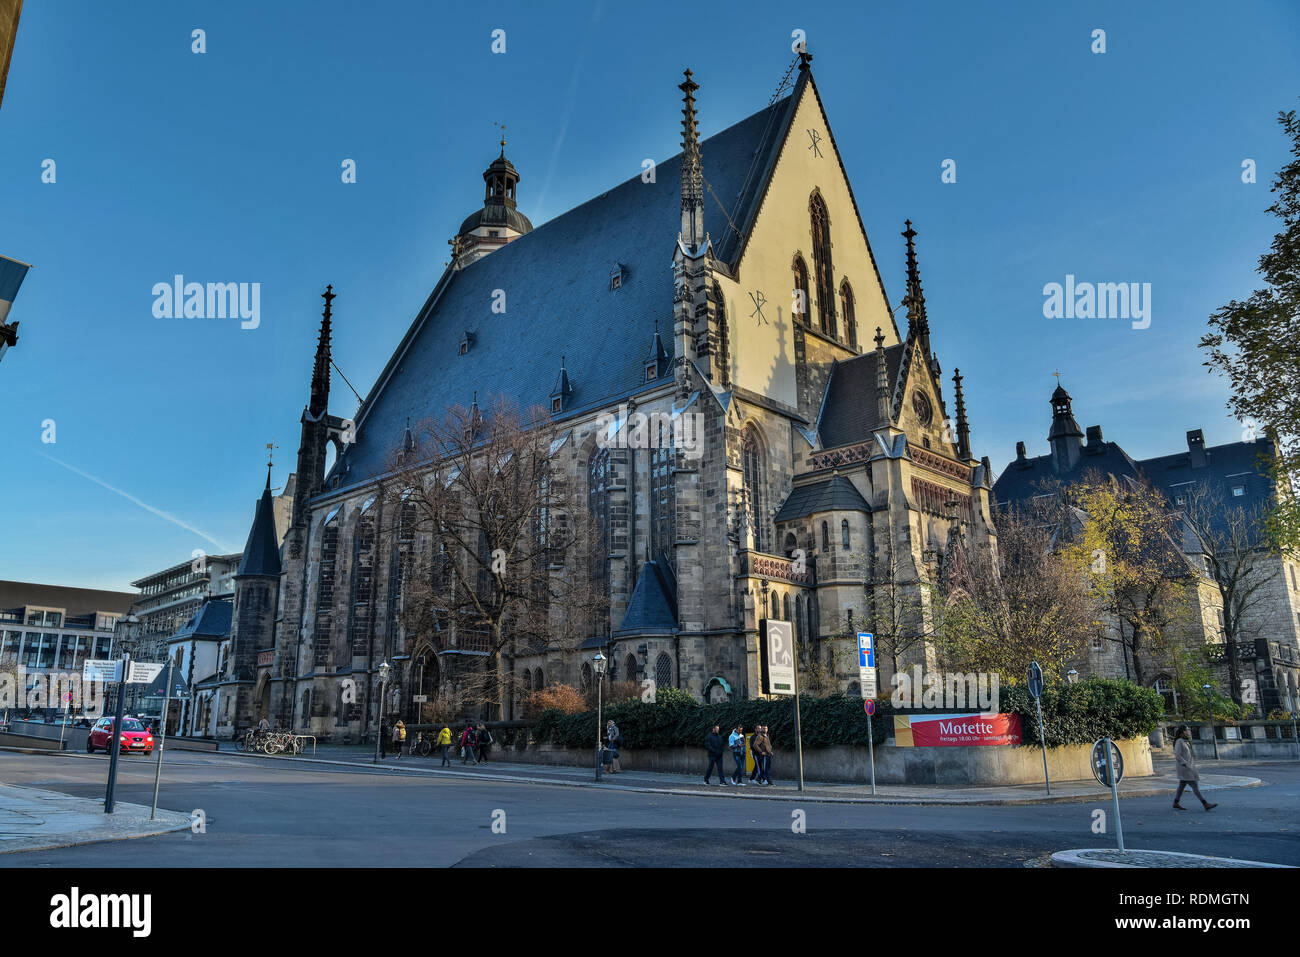 Leipzig, Germany - November 14, 2018. Exterior view of St. Thomas Church (Thomaskirche) in Leipzig, with people and street traffic. Stock Photo